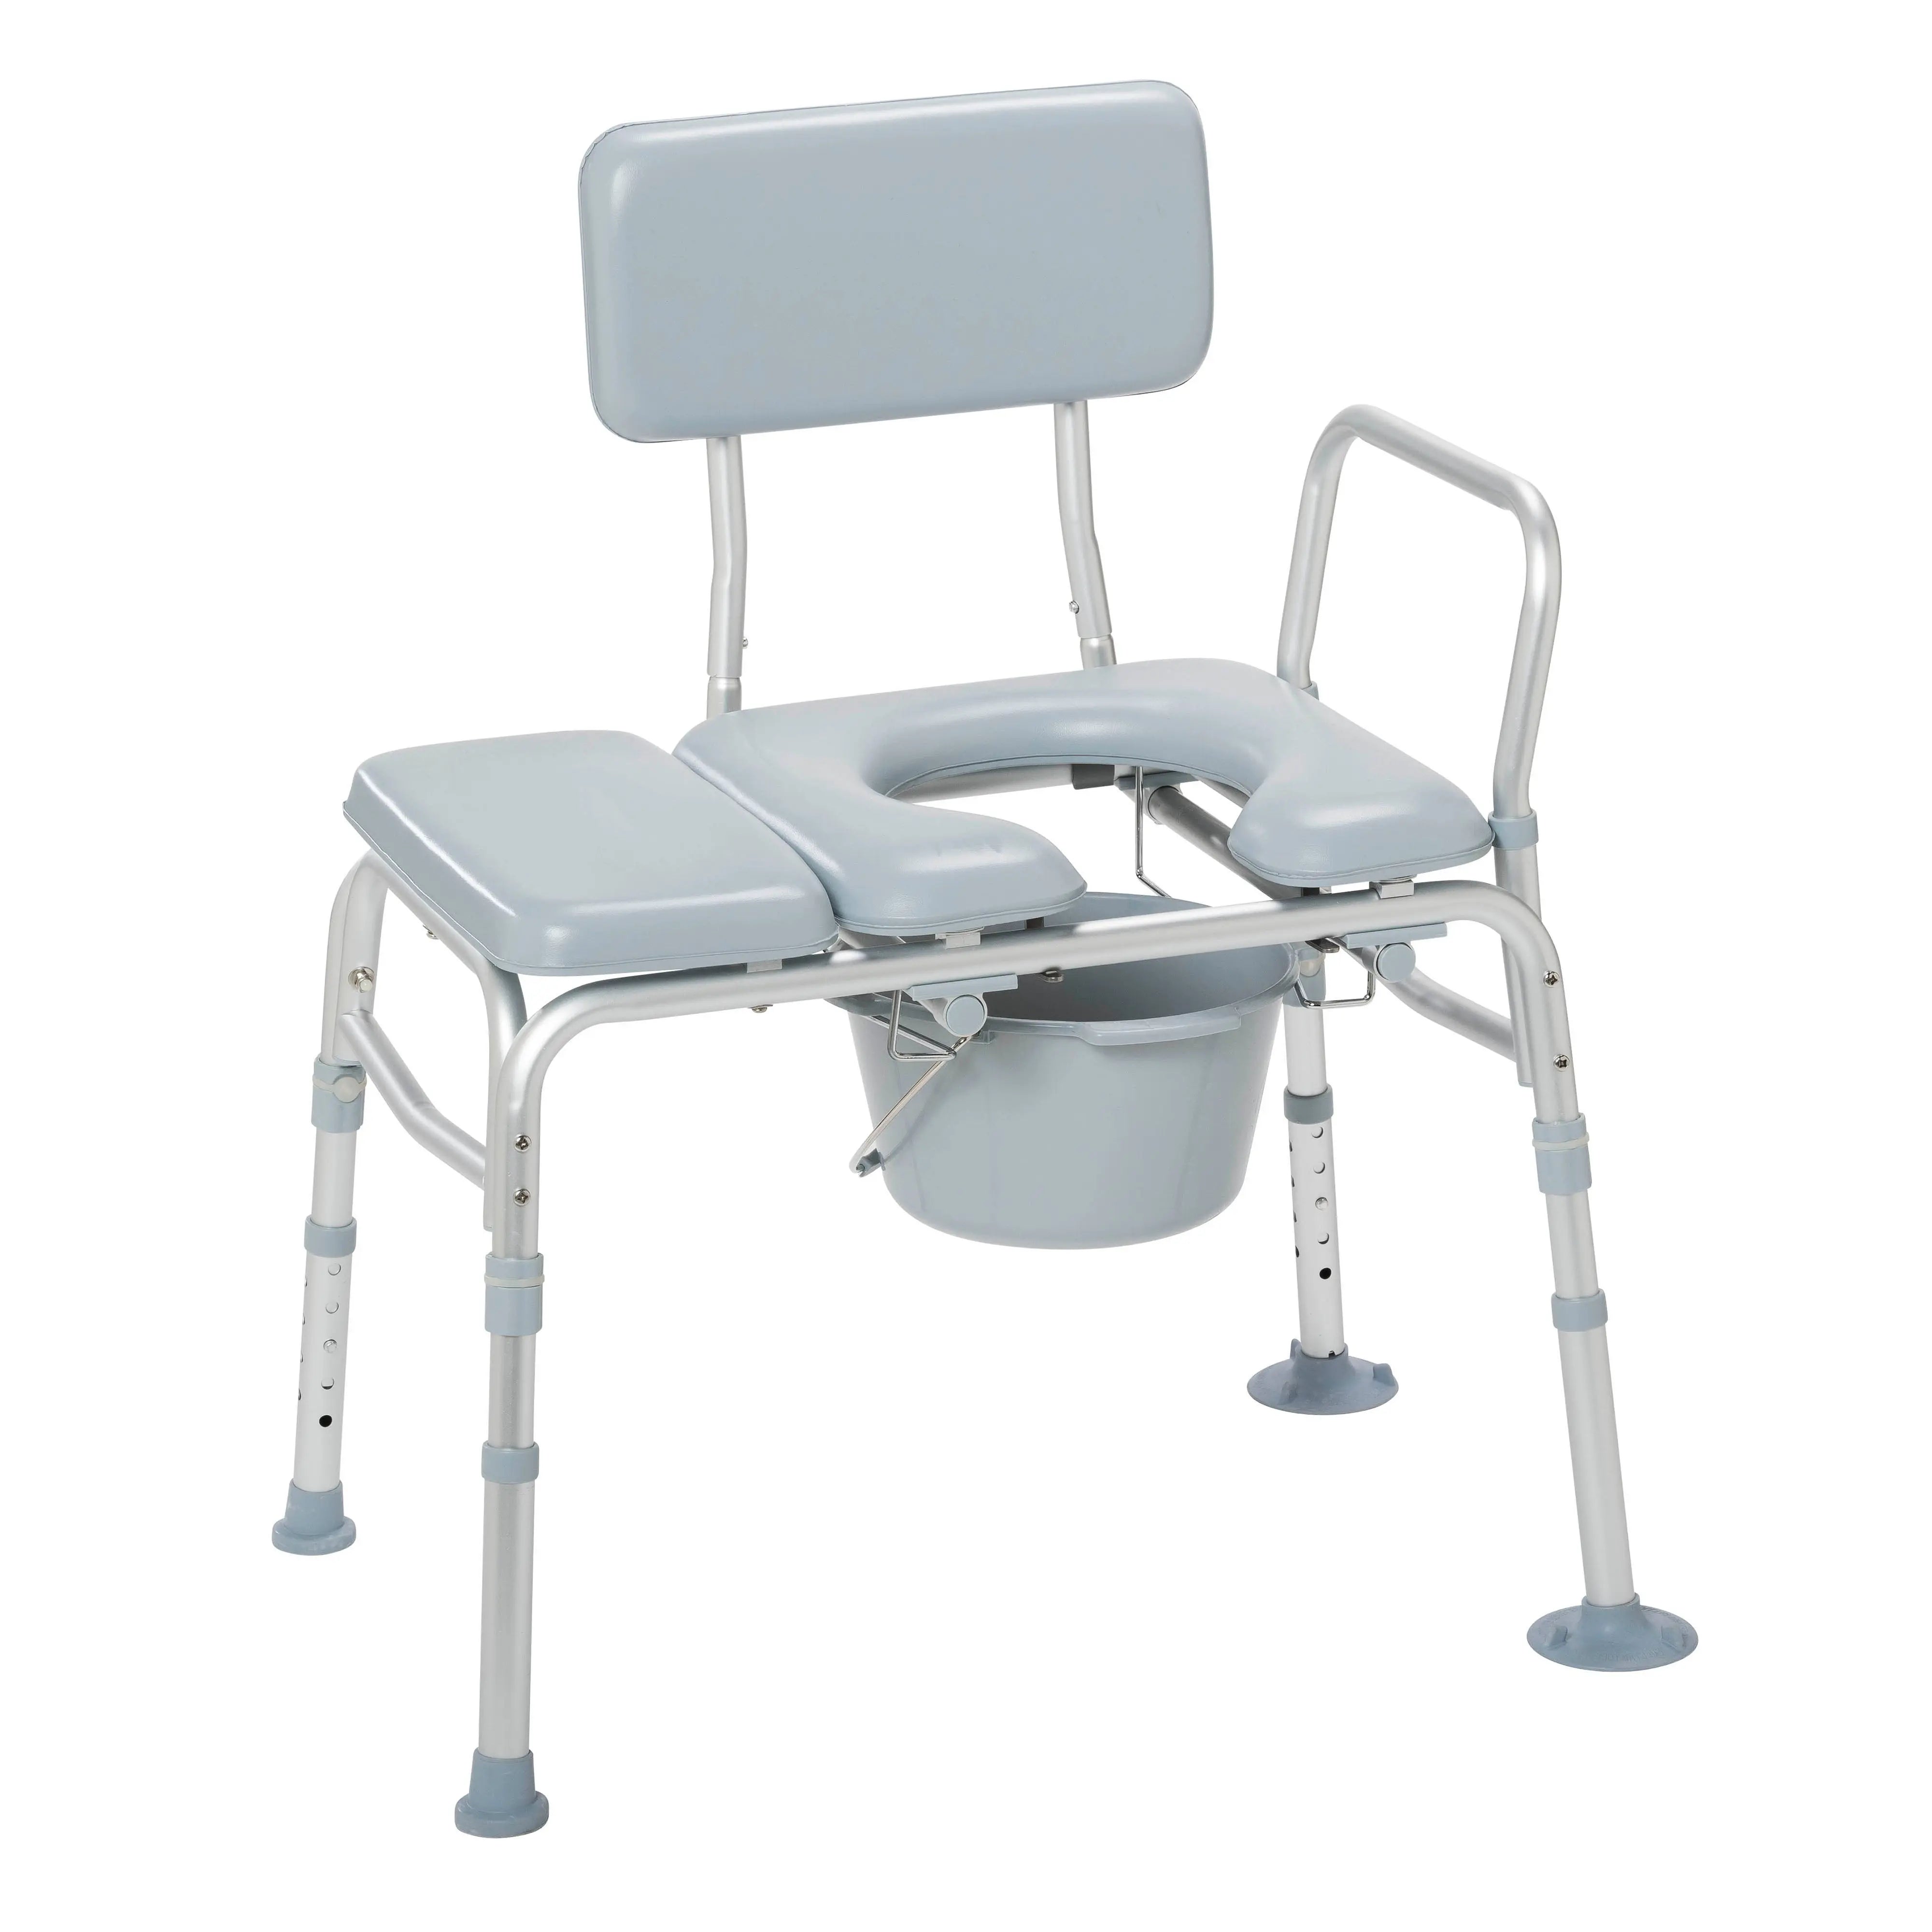 Padded Seat Transfer Bench with Commode Opening - Home Health Store Inc